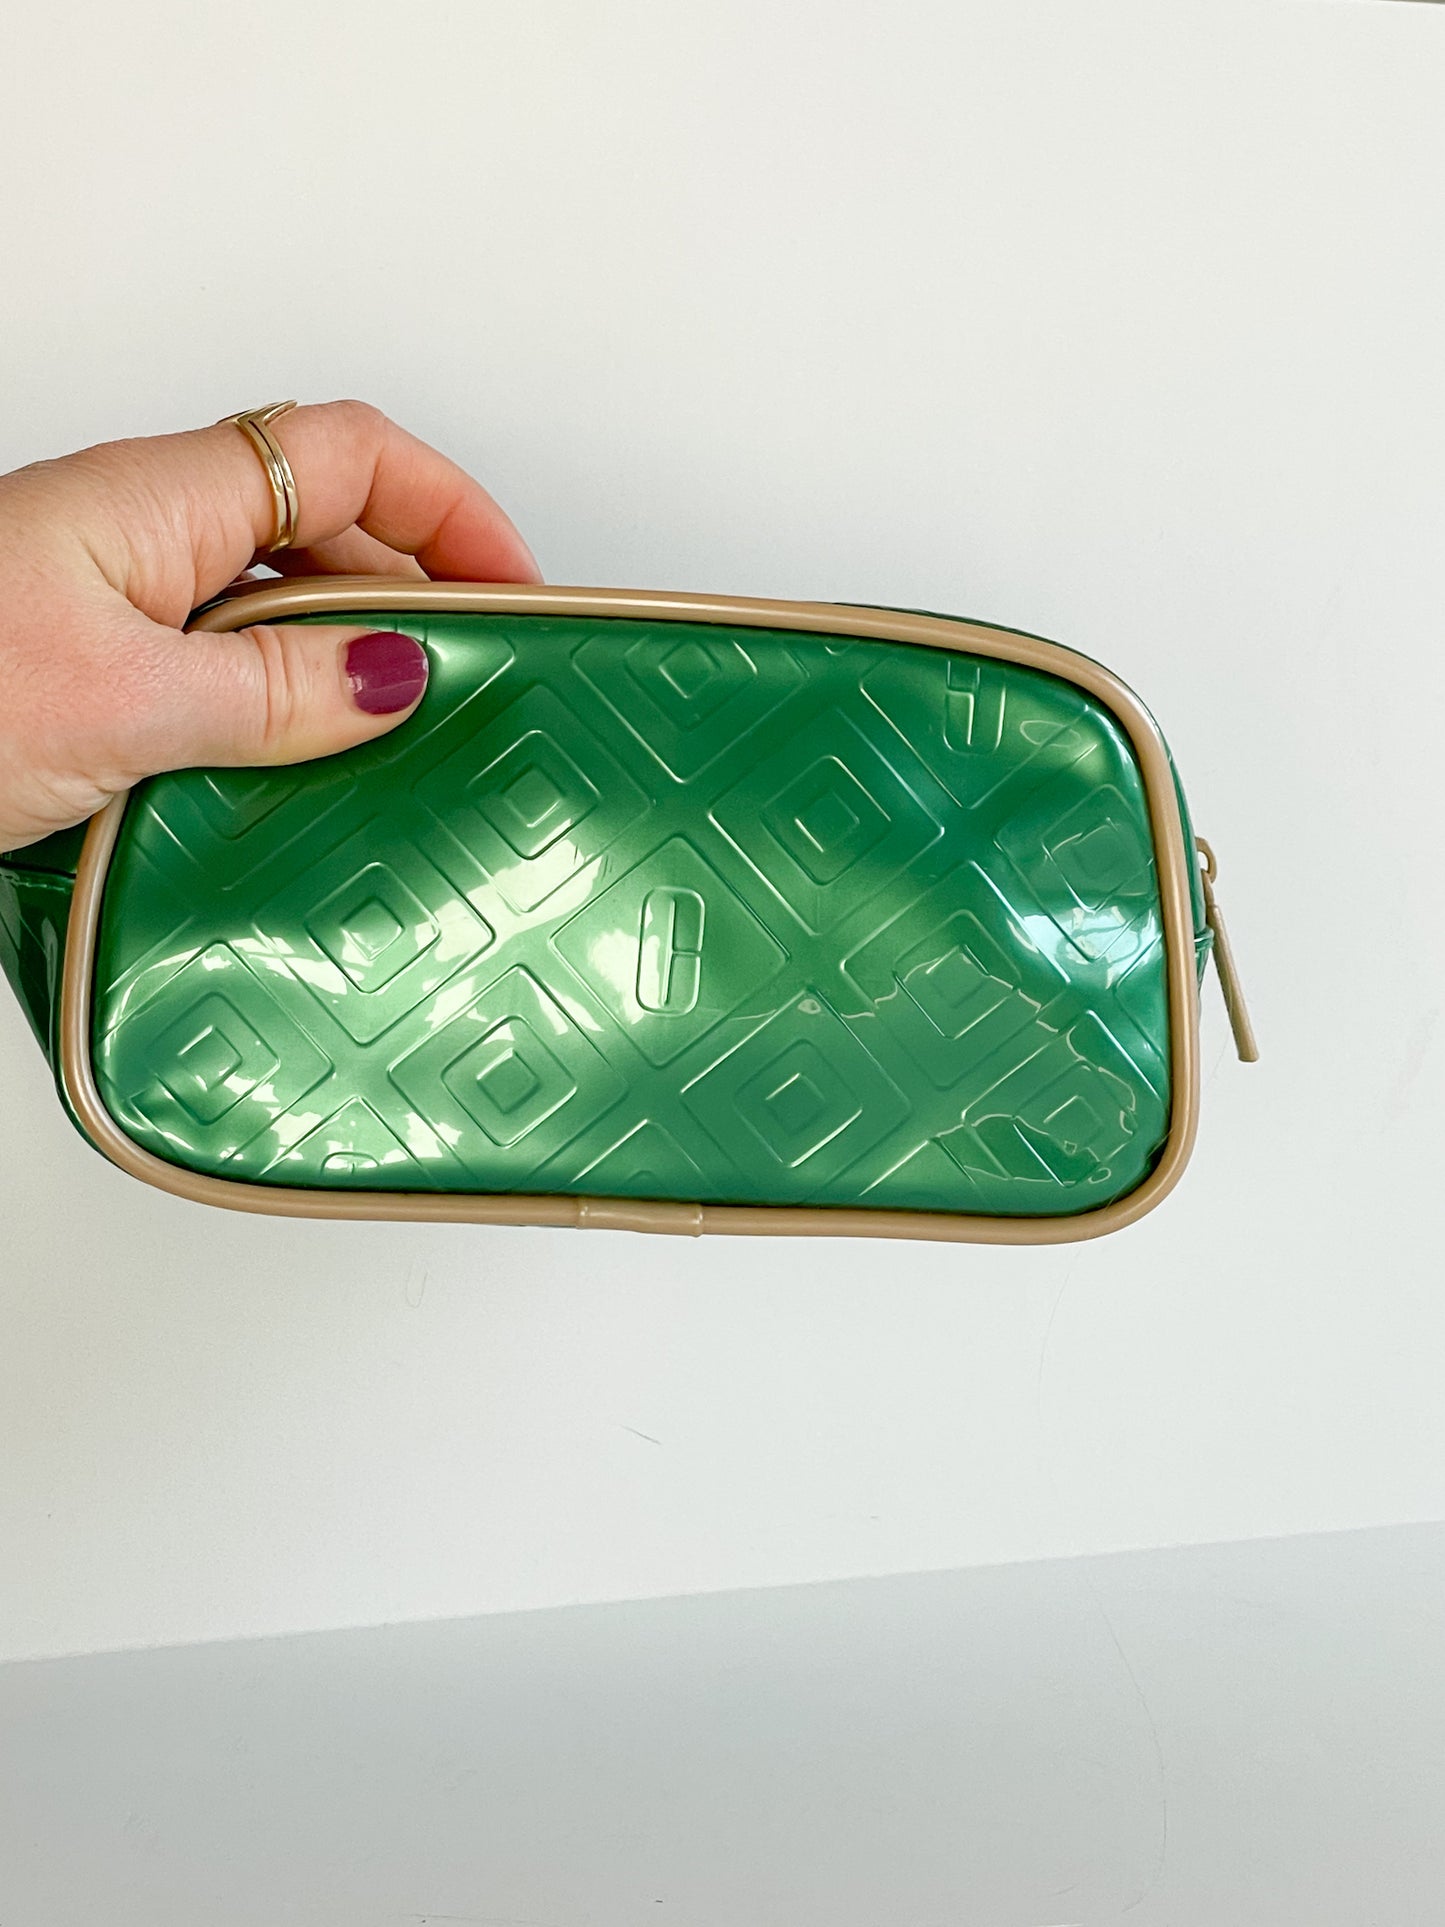 Clinique Metallic Green Lacquer Taupe Piping Toiletry Makeup Bag Clutch